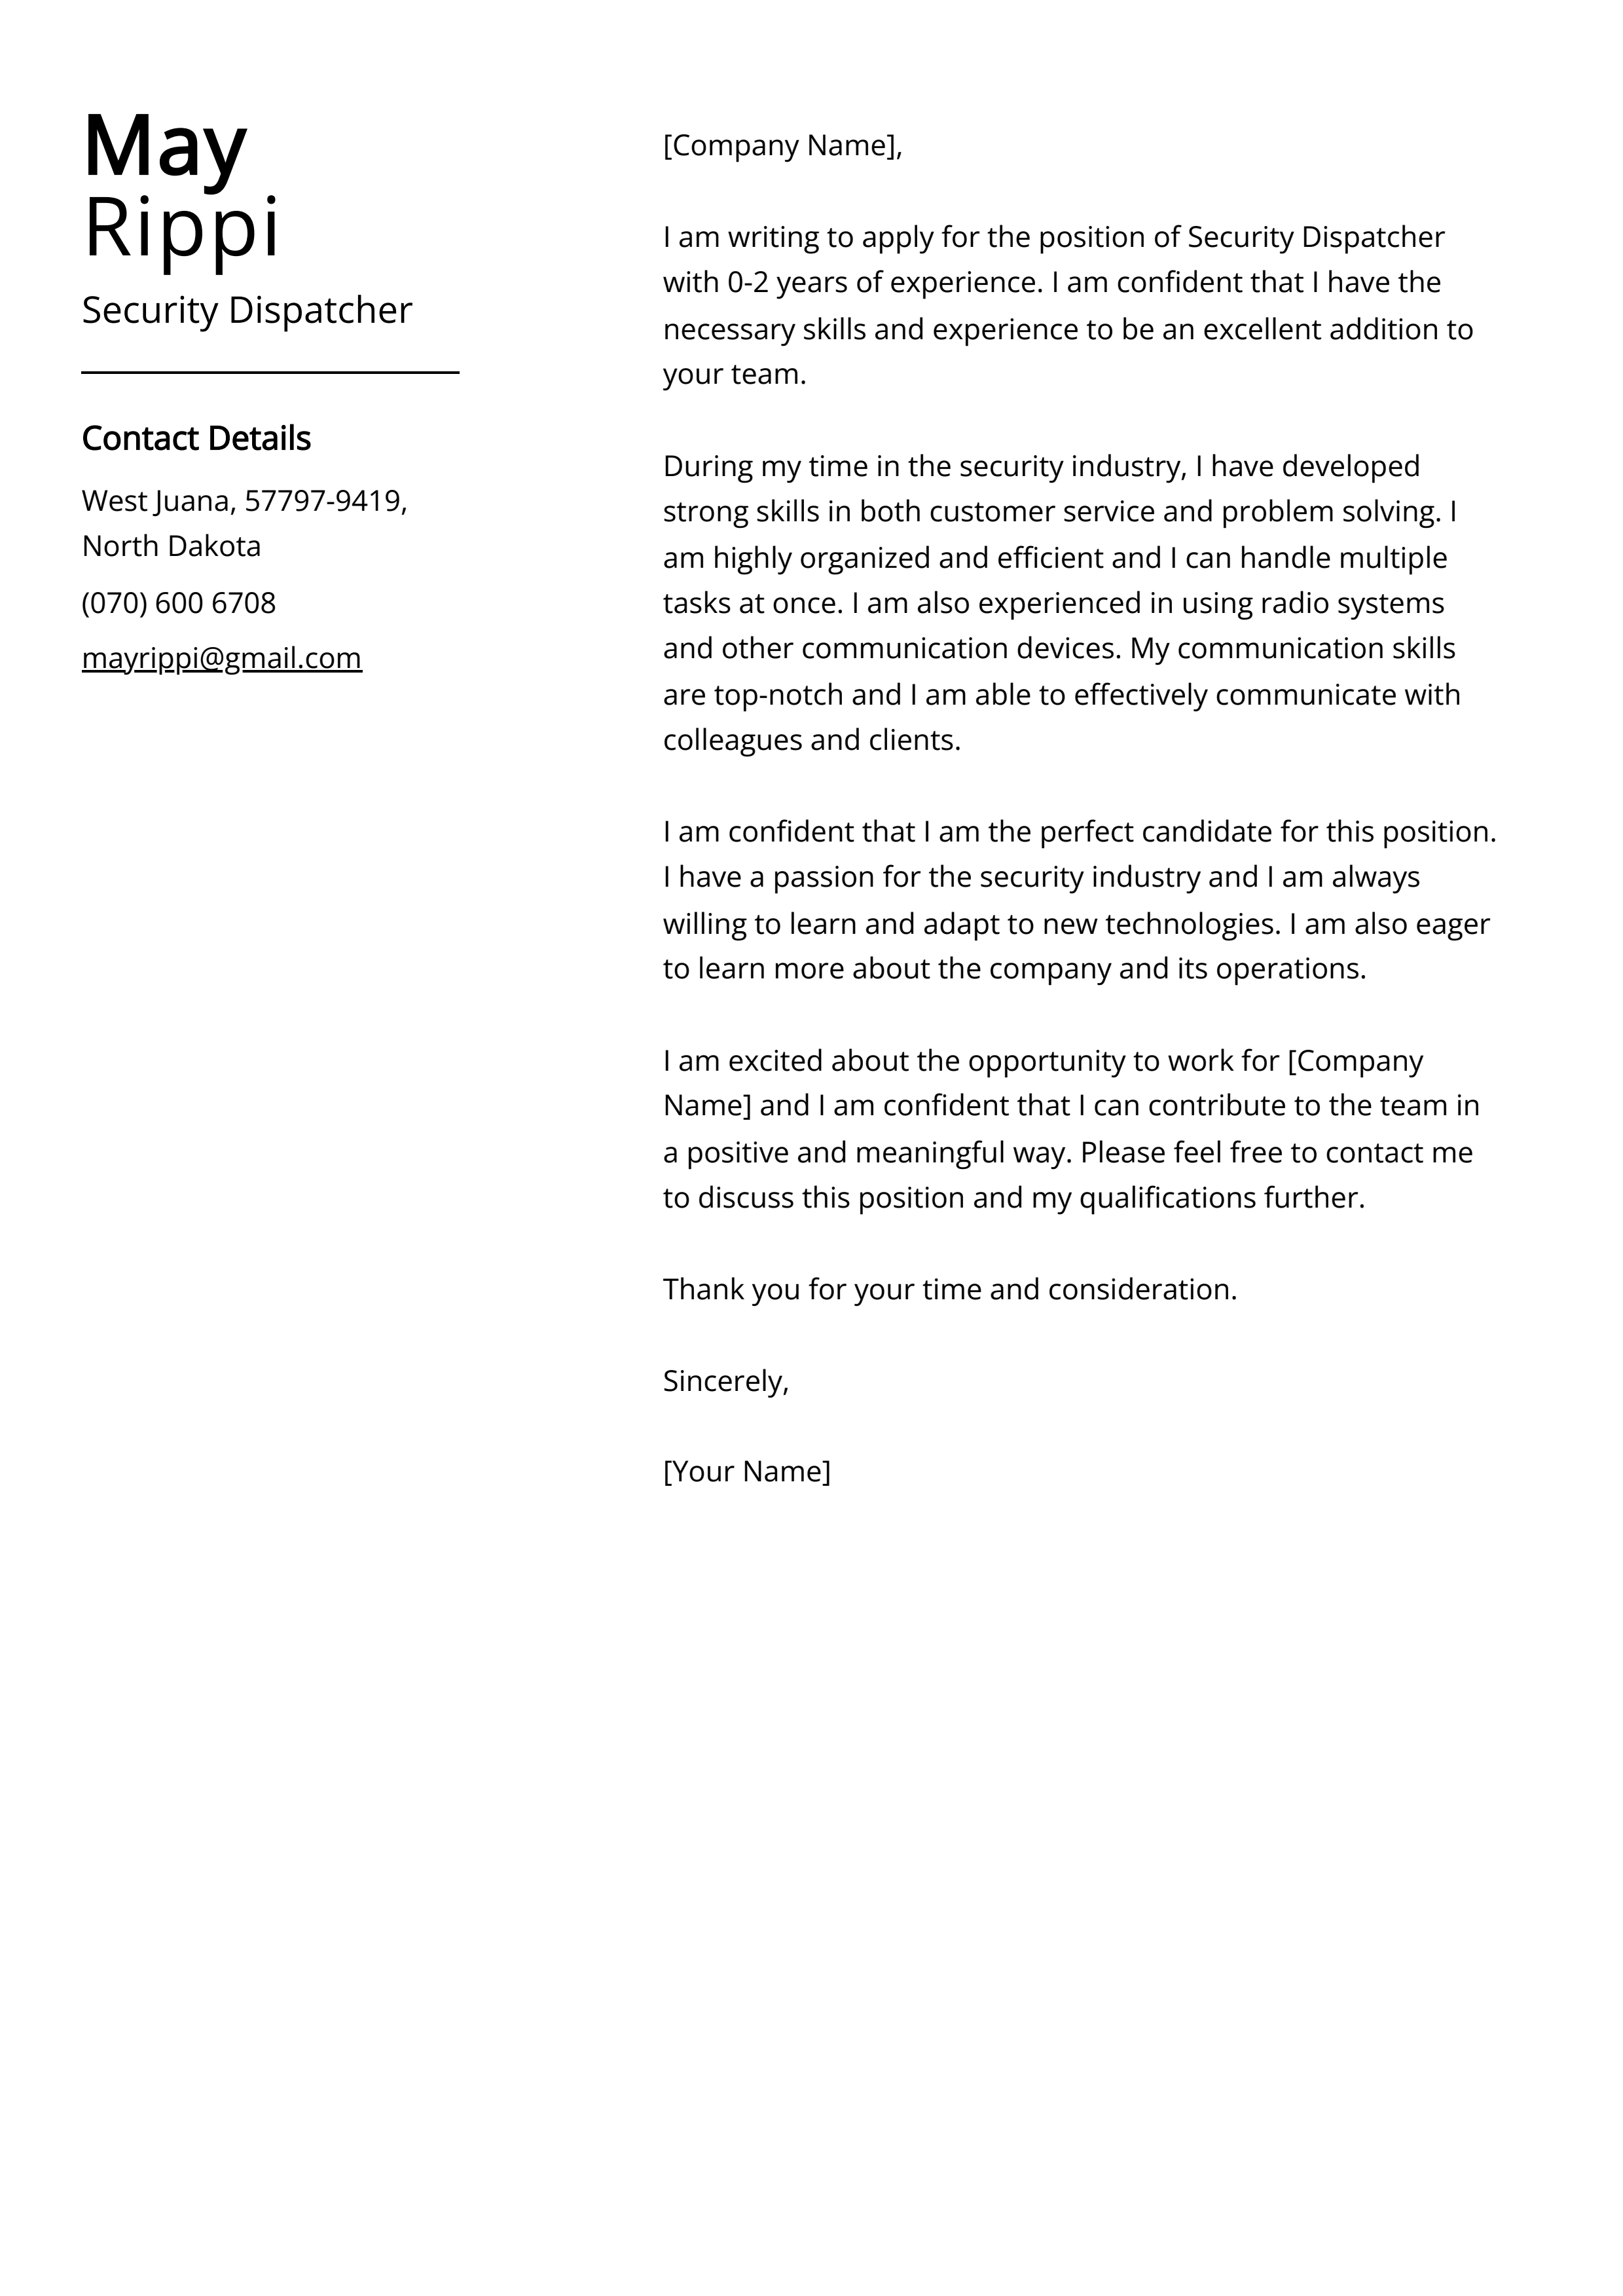 Security Dispatcher Cover Letter Example